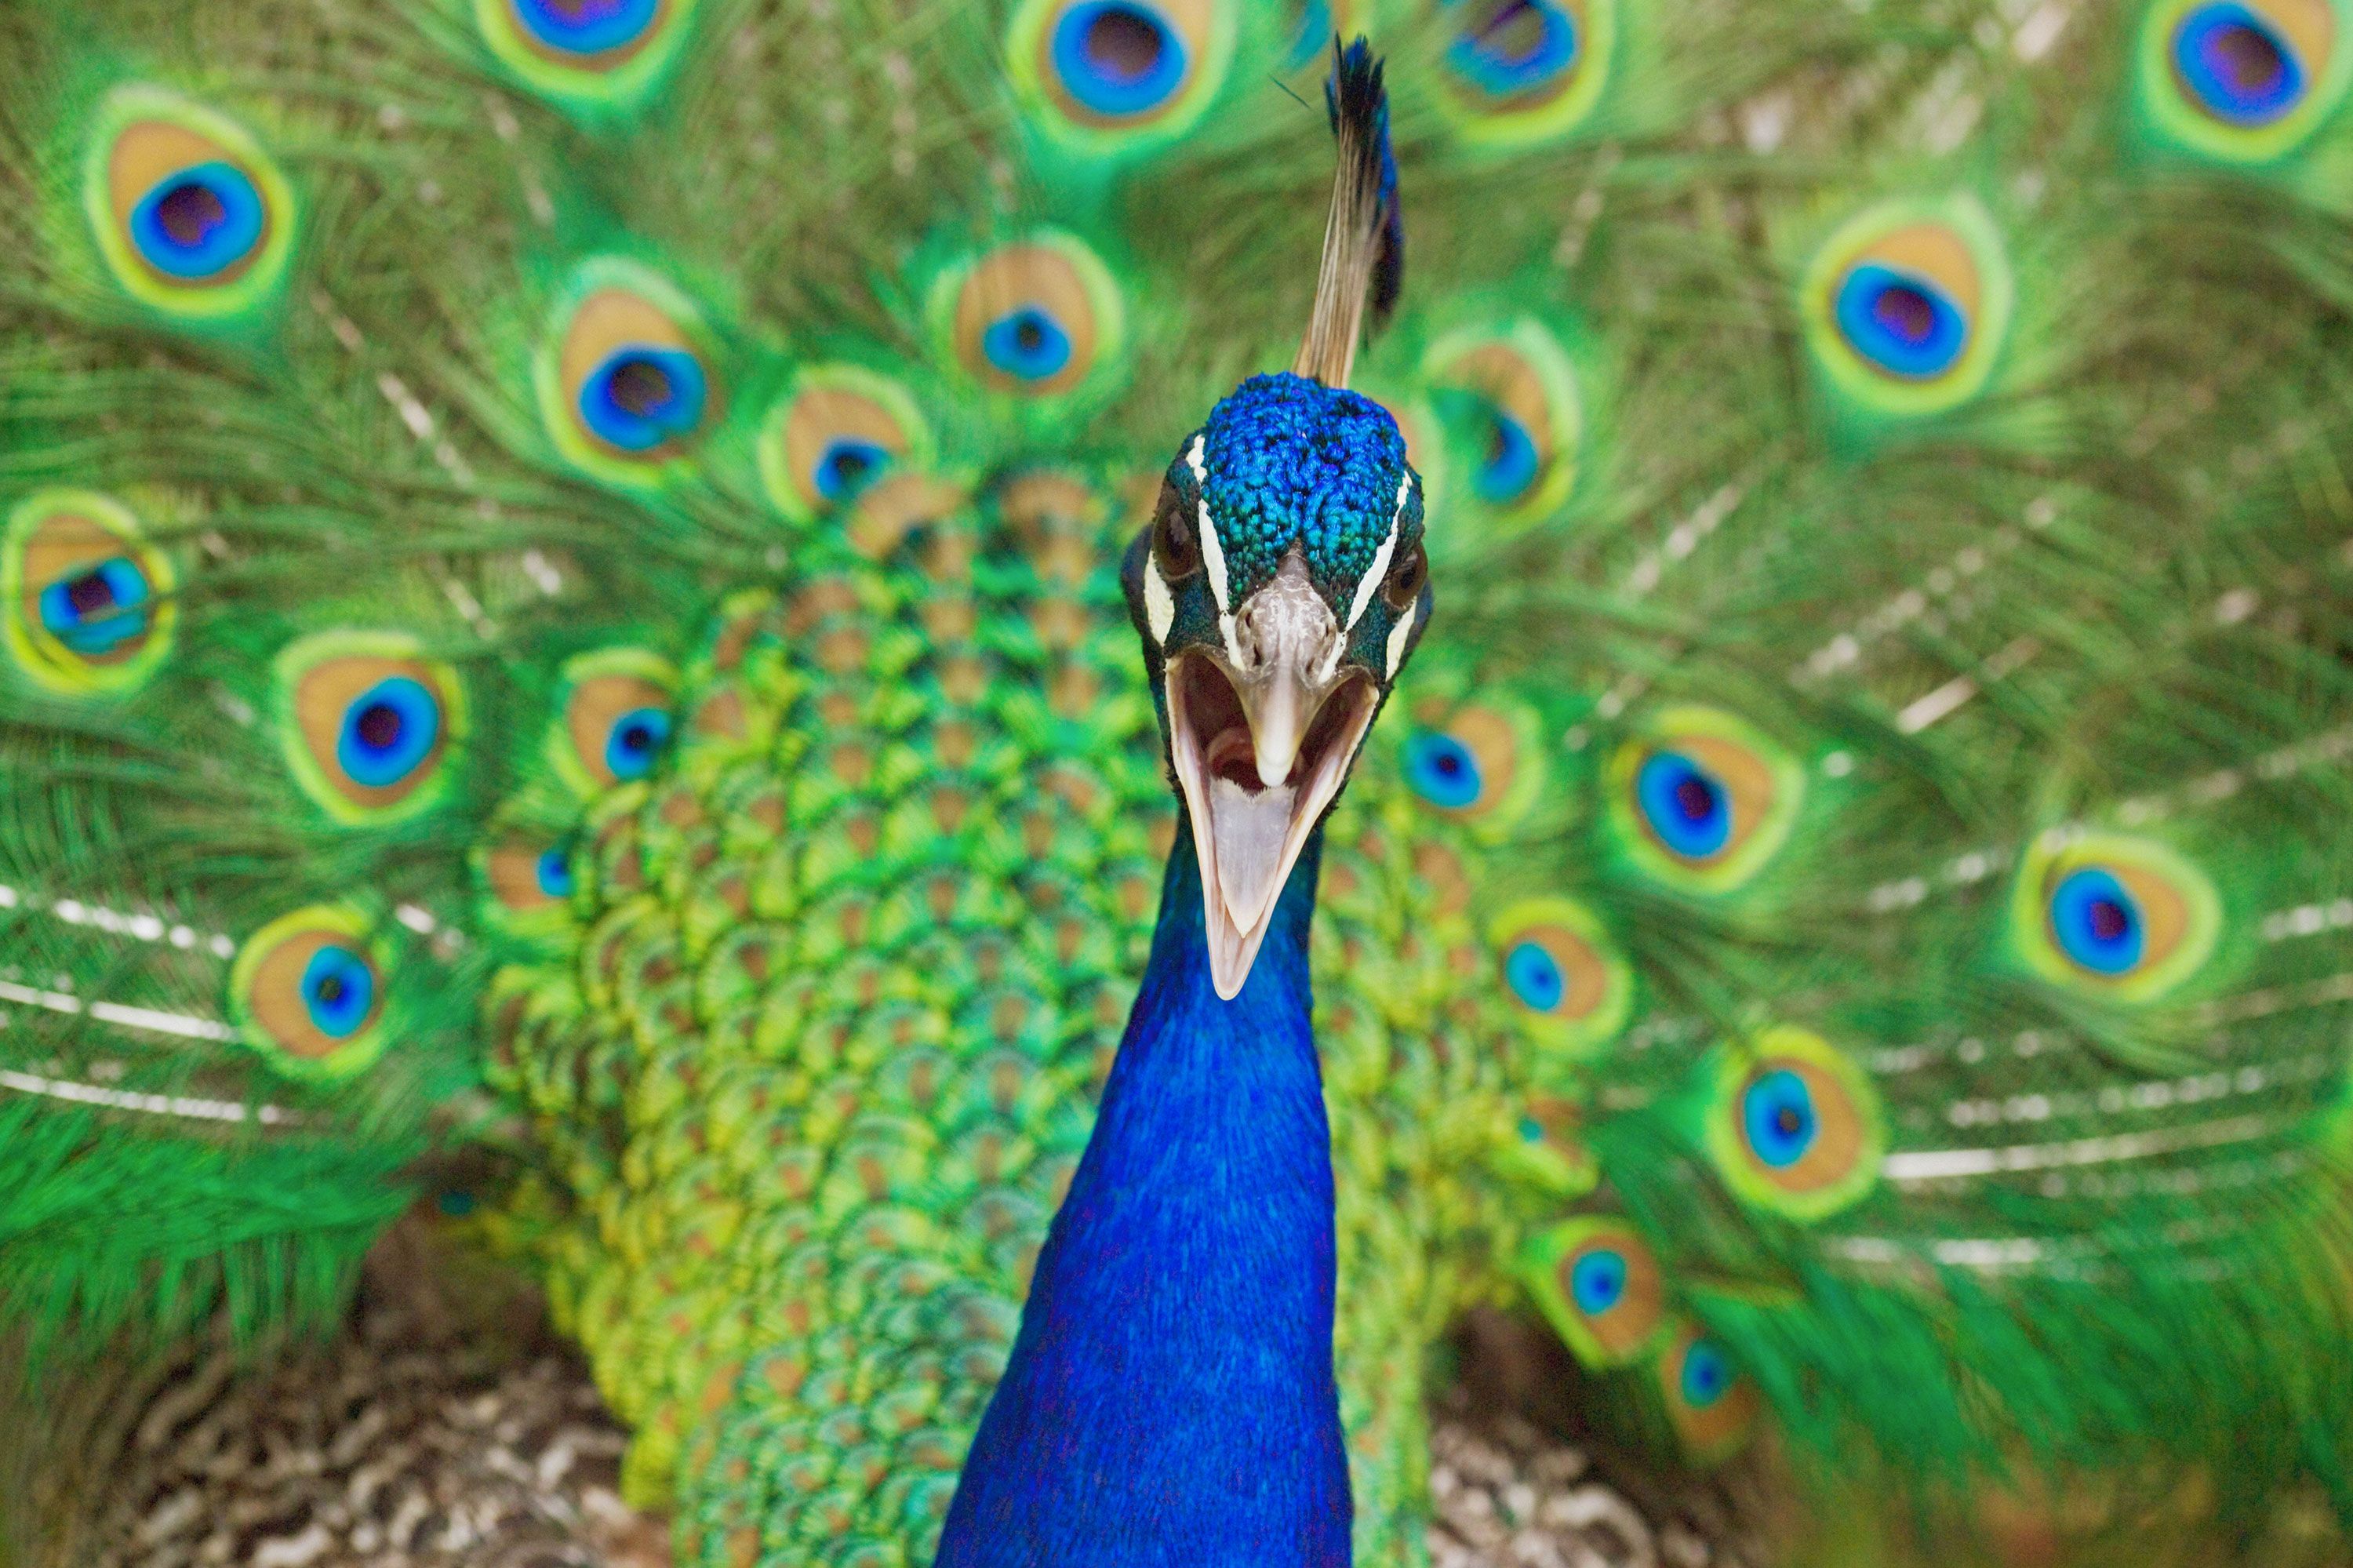 The Peacock That 'Screams Relentlessly' Has a Point